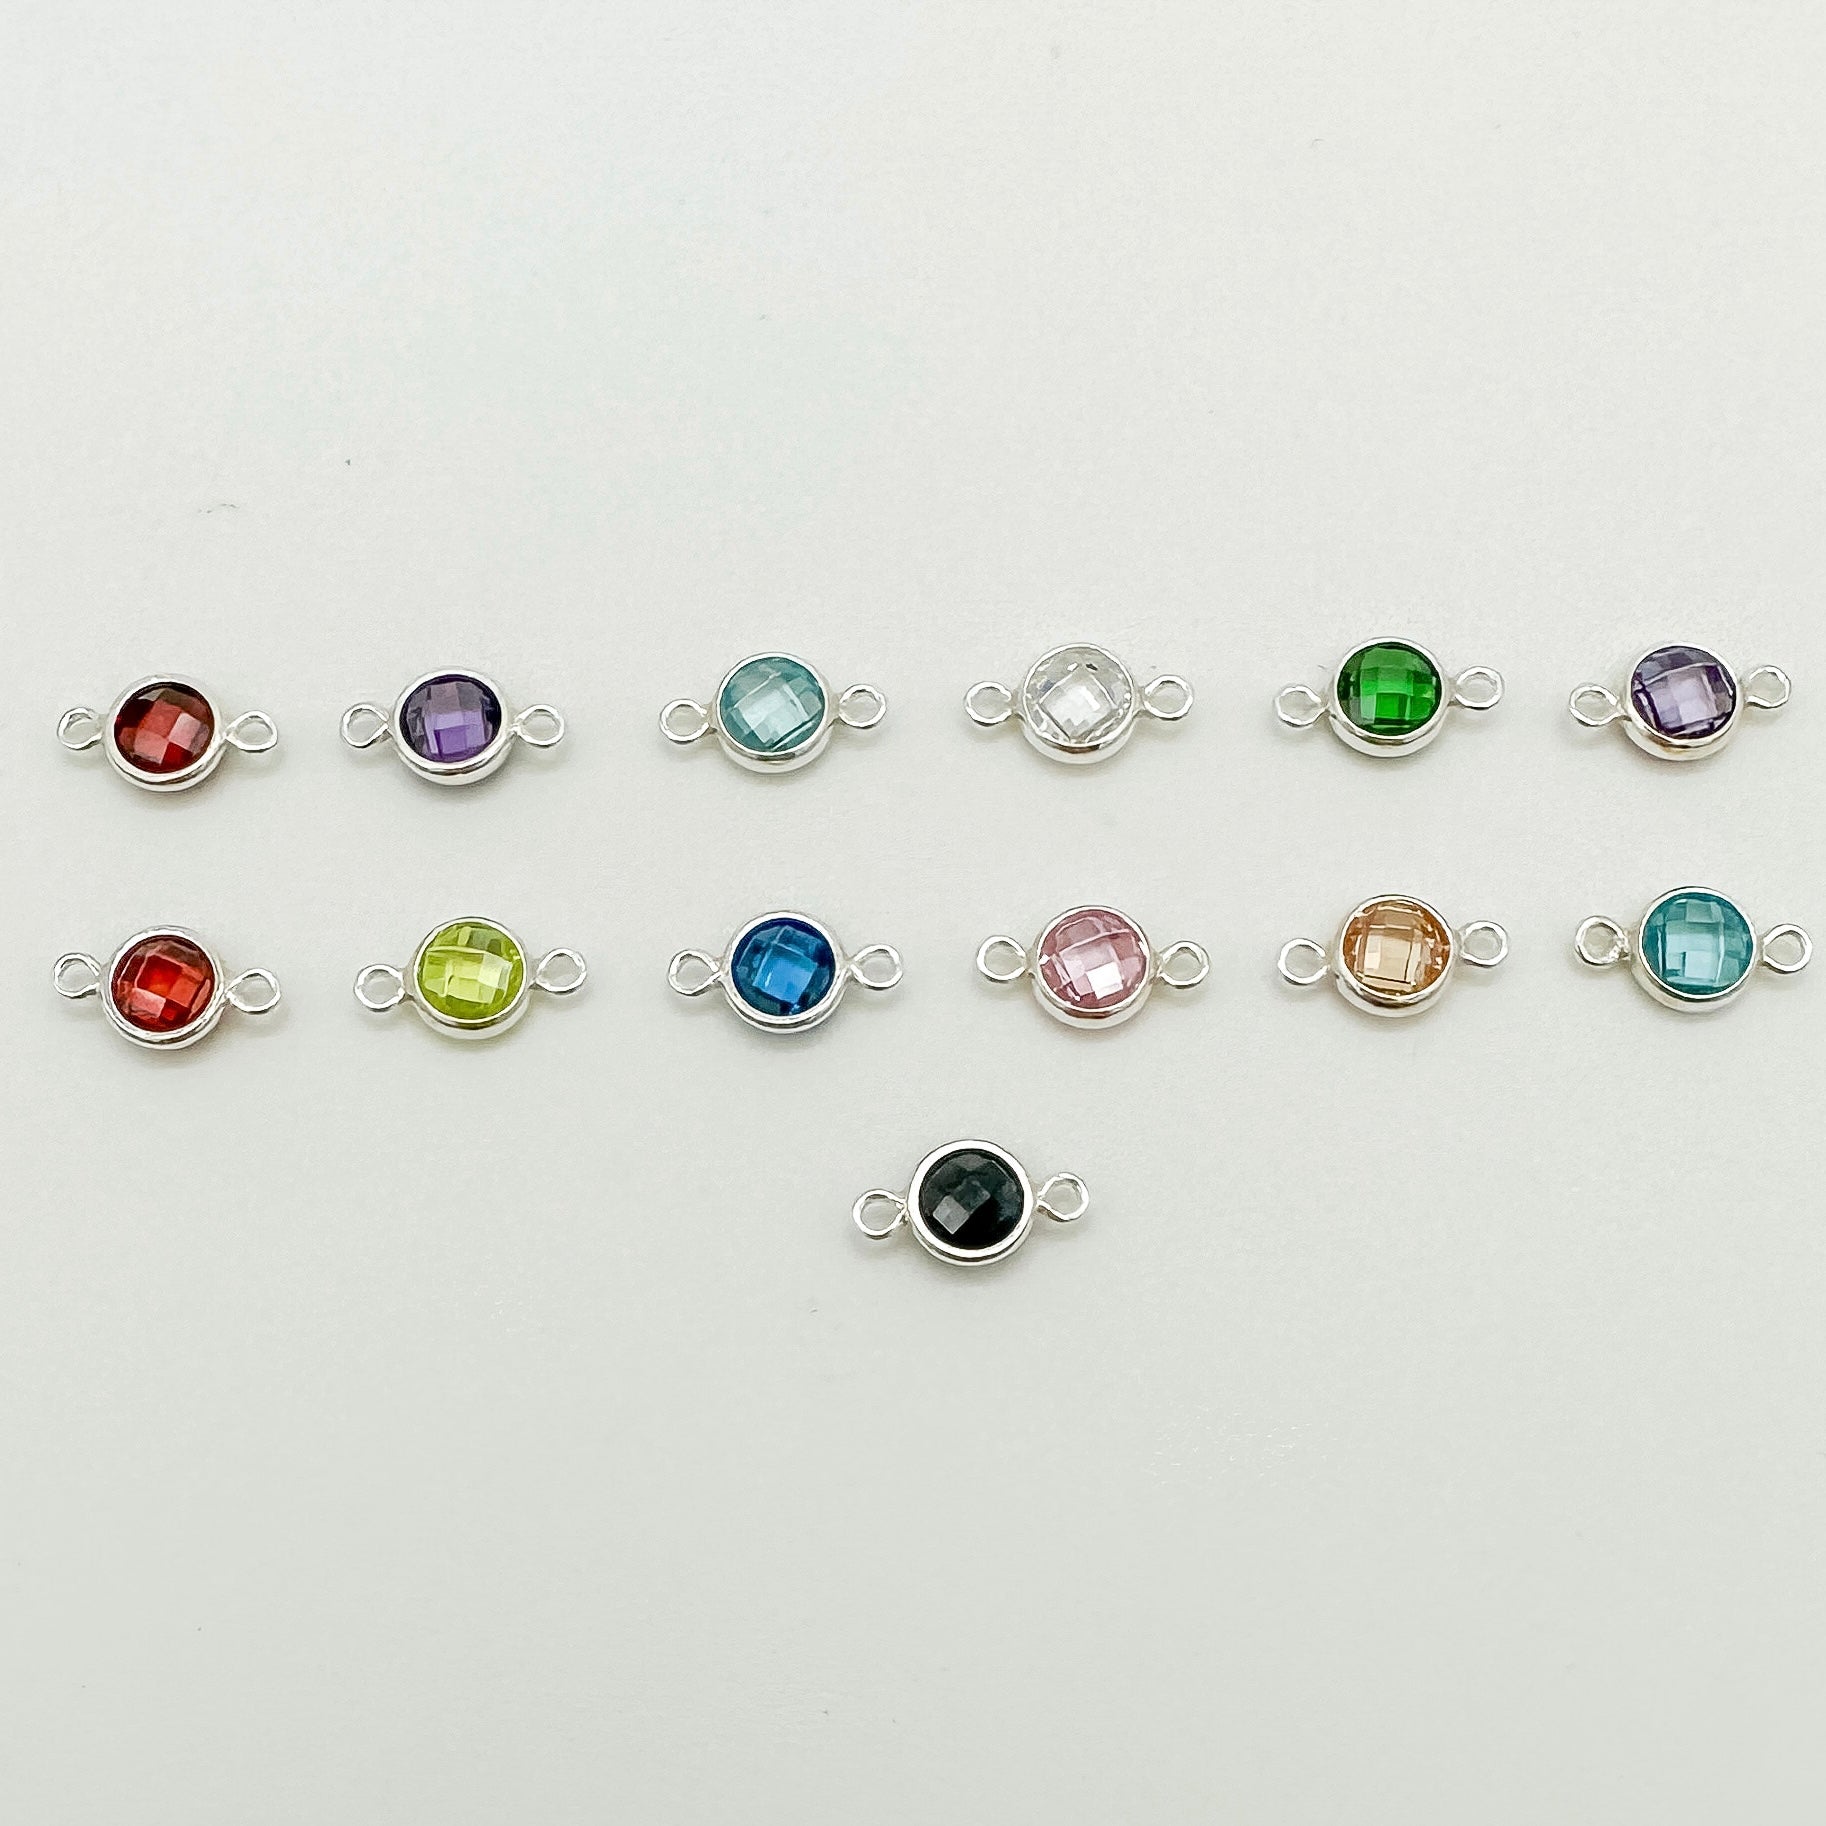 4mm Double-Sided CZ Birthstone Connectors